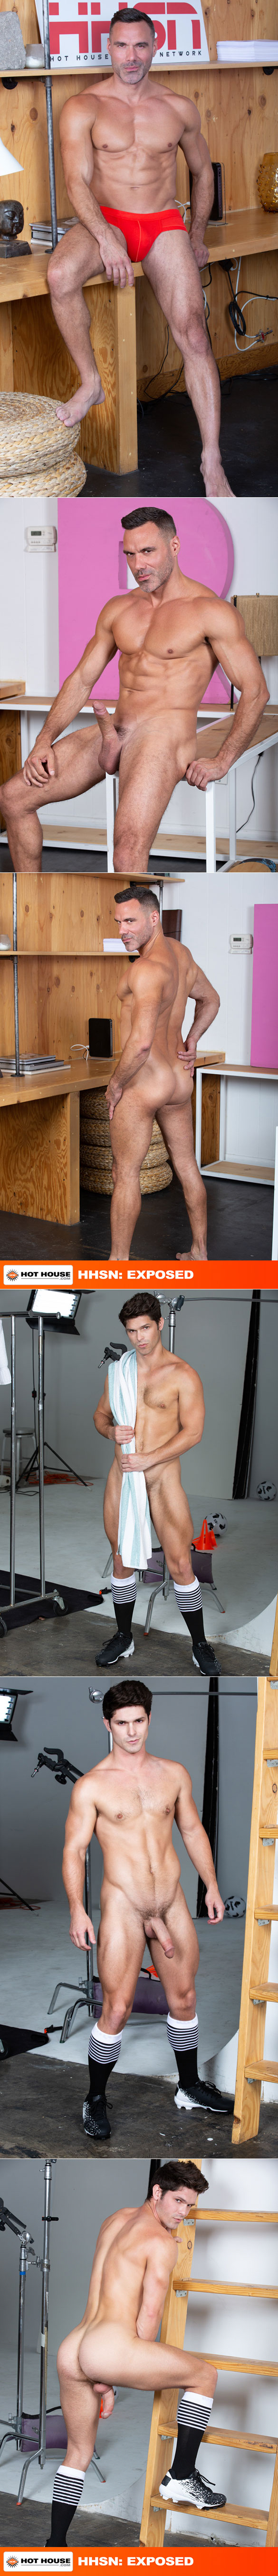 HotHouse: Manuel Skye pounds Devin Franco raw in "HHSN: Exposed"